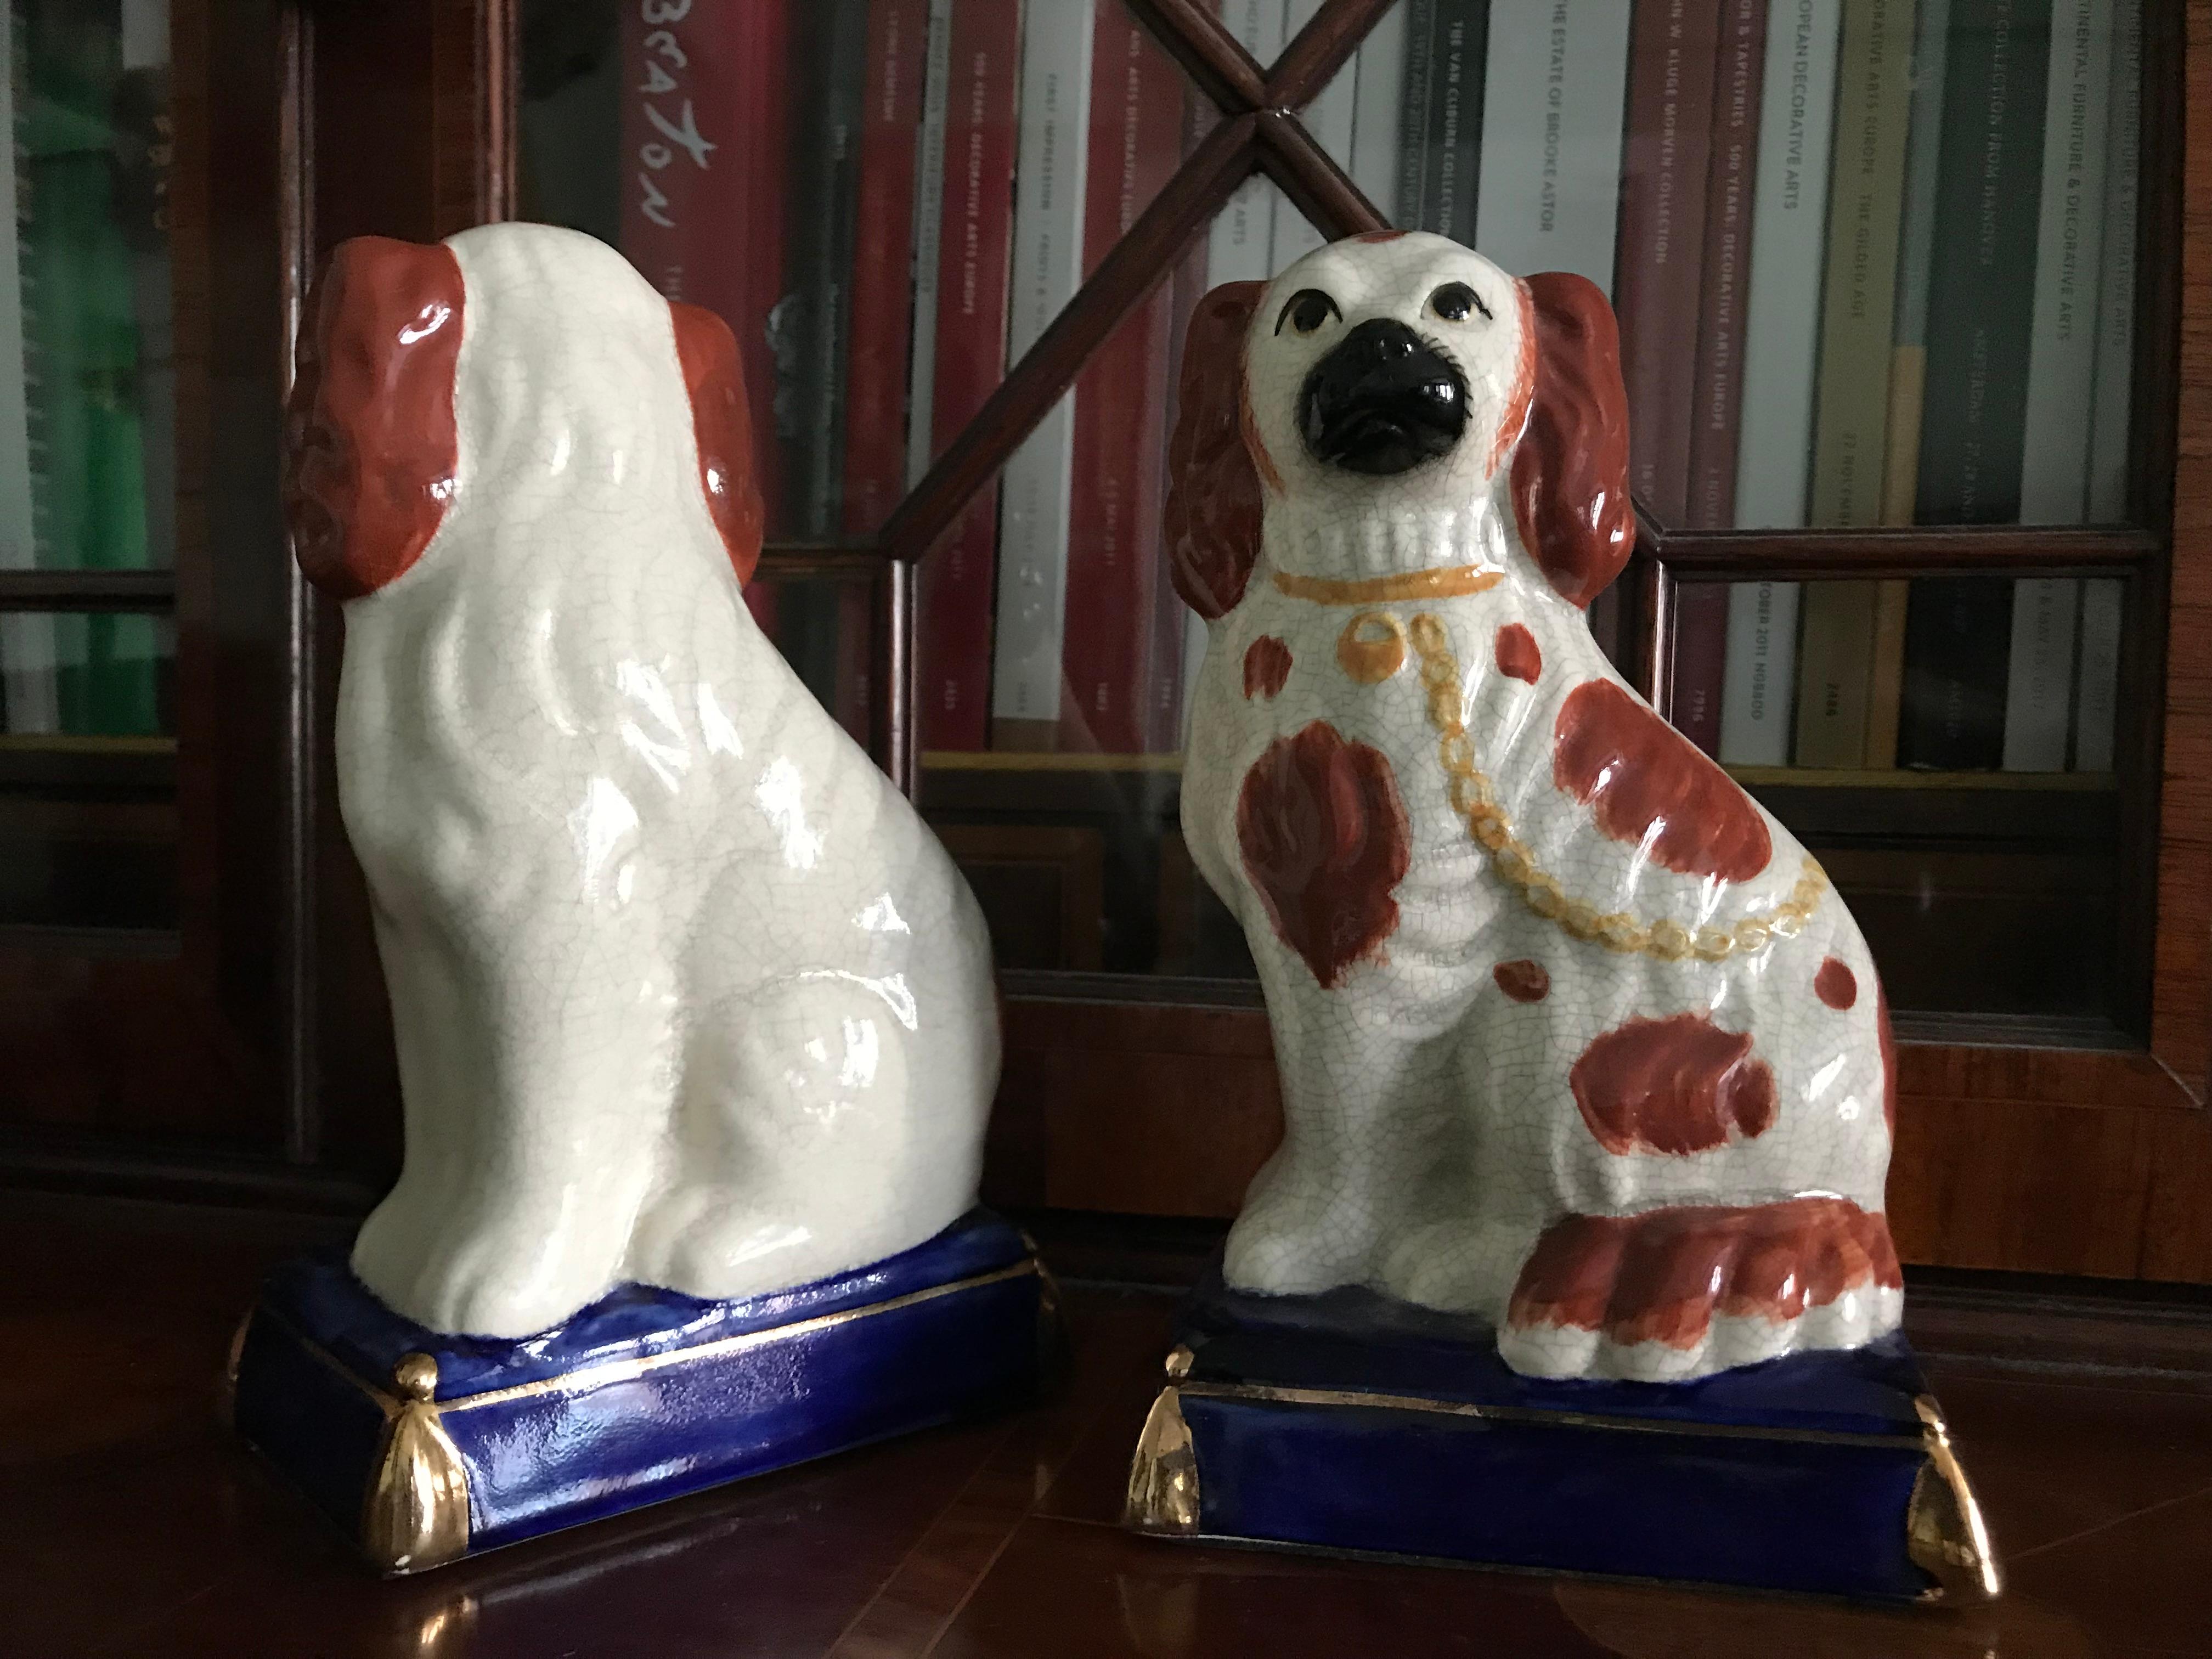 Molded Pair of Staffordshire Dogs, with Bright Blue Base, Late 19th-Early 20th Century